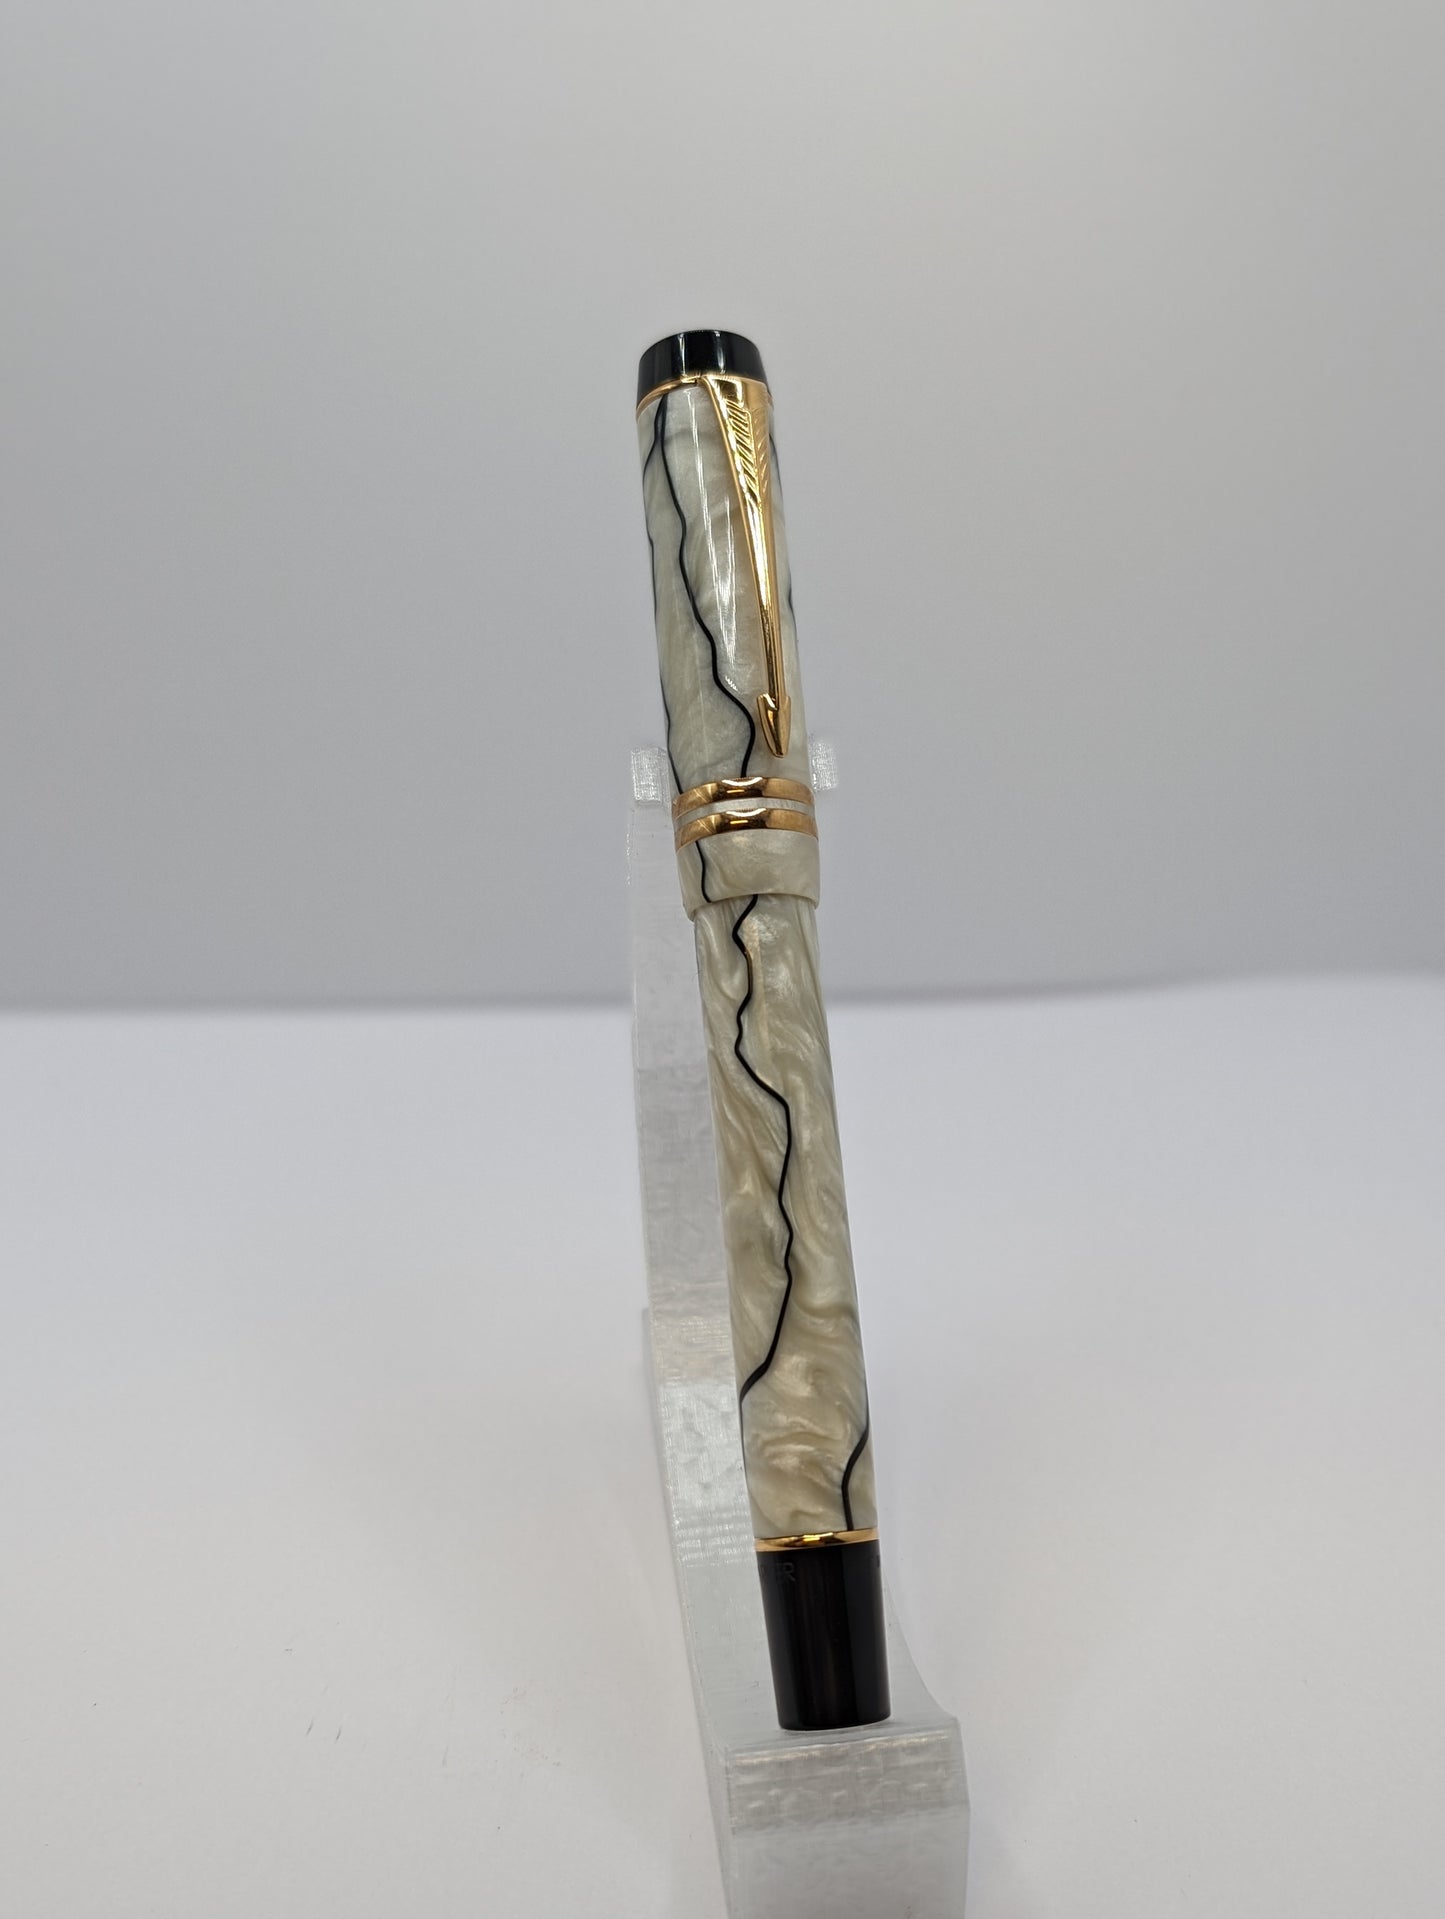 Parker Duofold Pearl and Black Ballpoint Pen